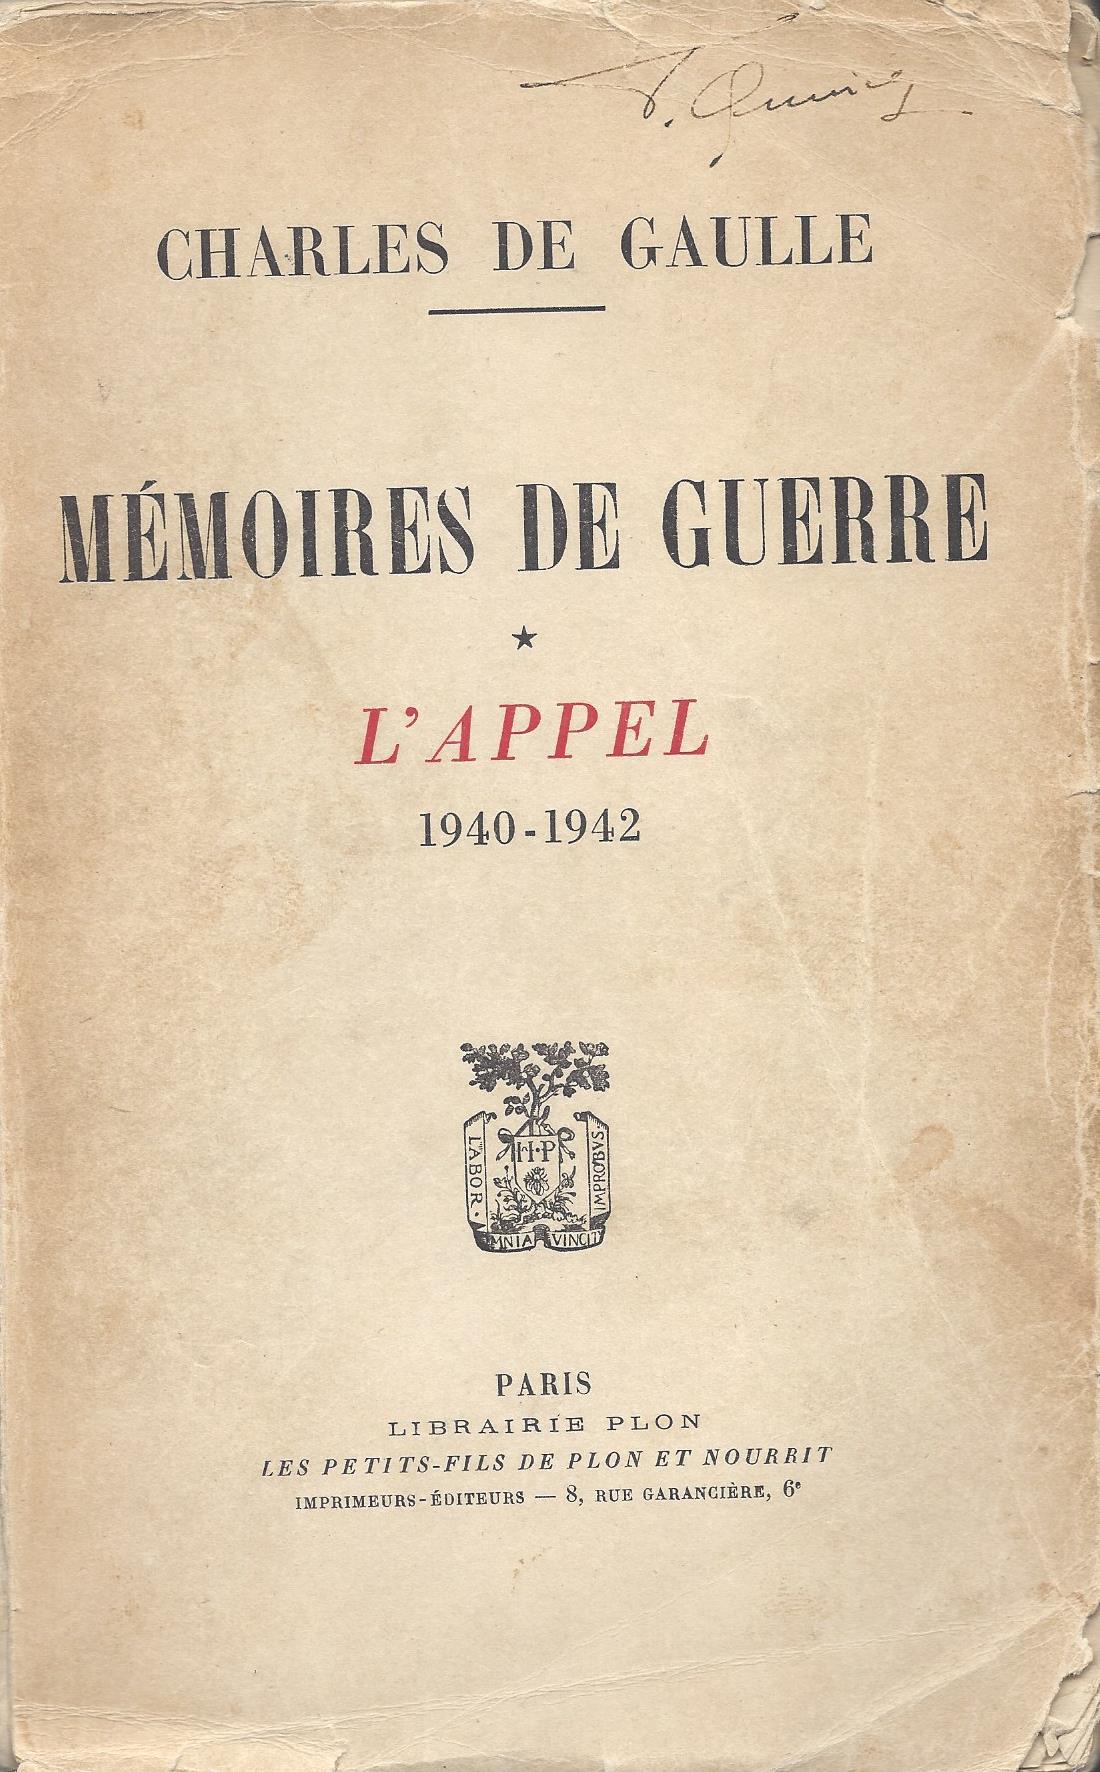 War Memoirs: The Call To Honour 1940 - 1942 Documents by Charles